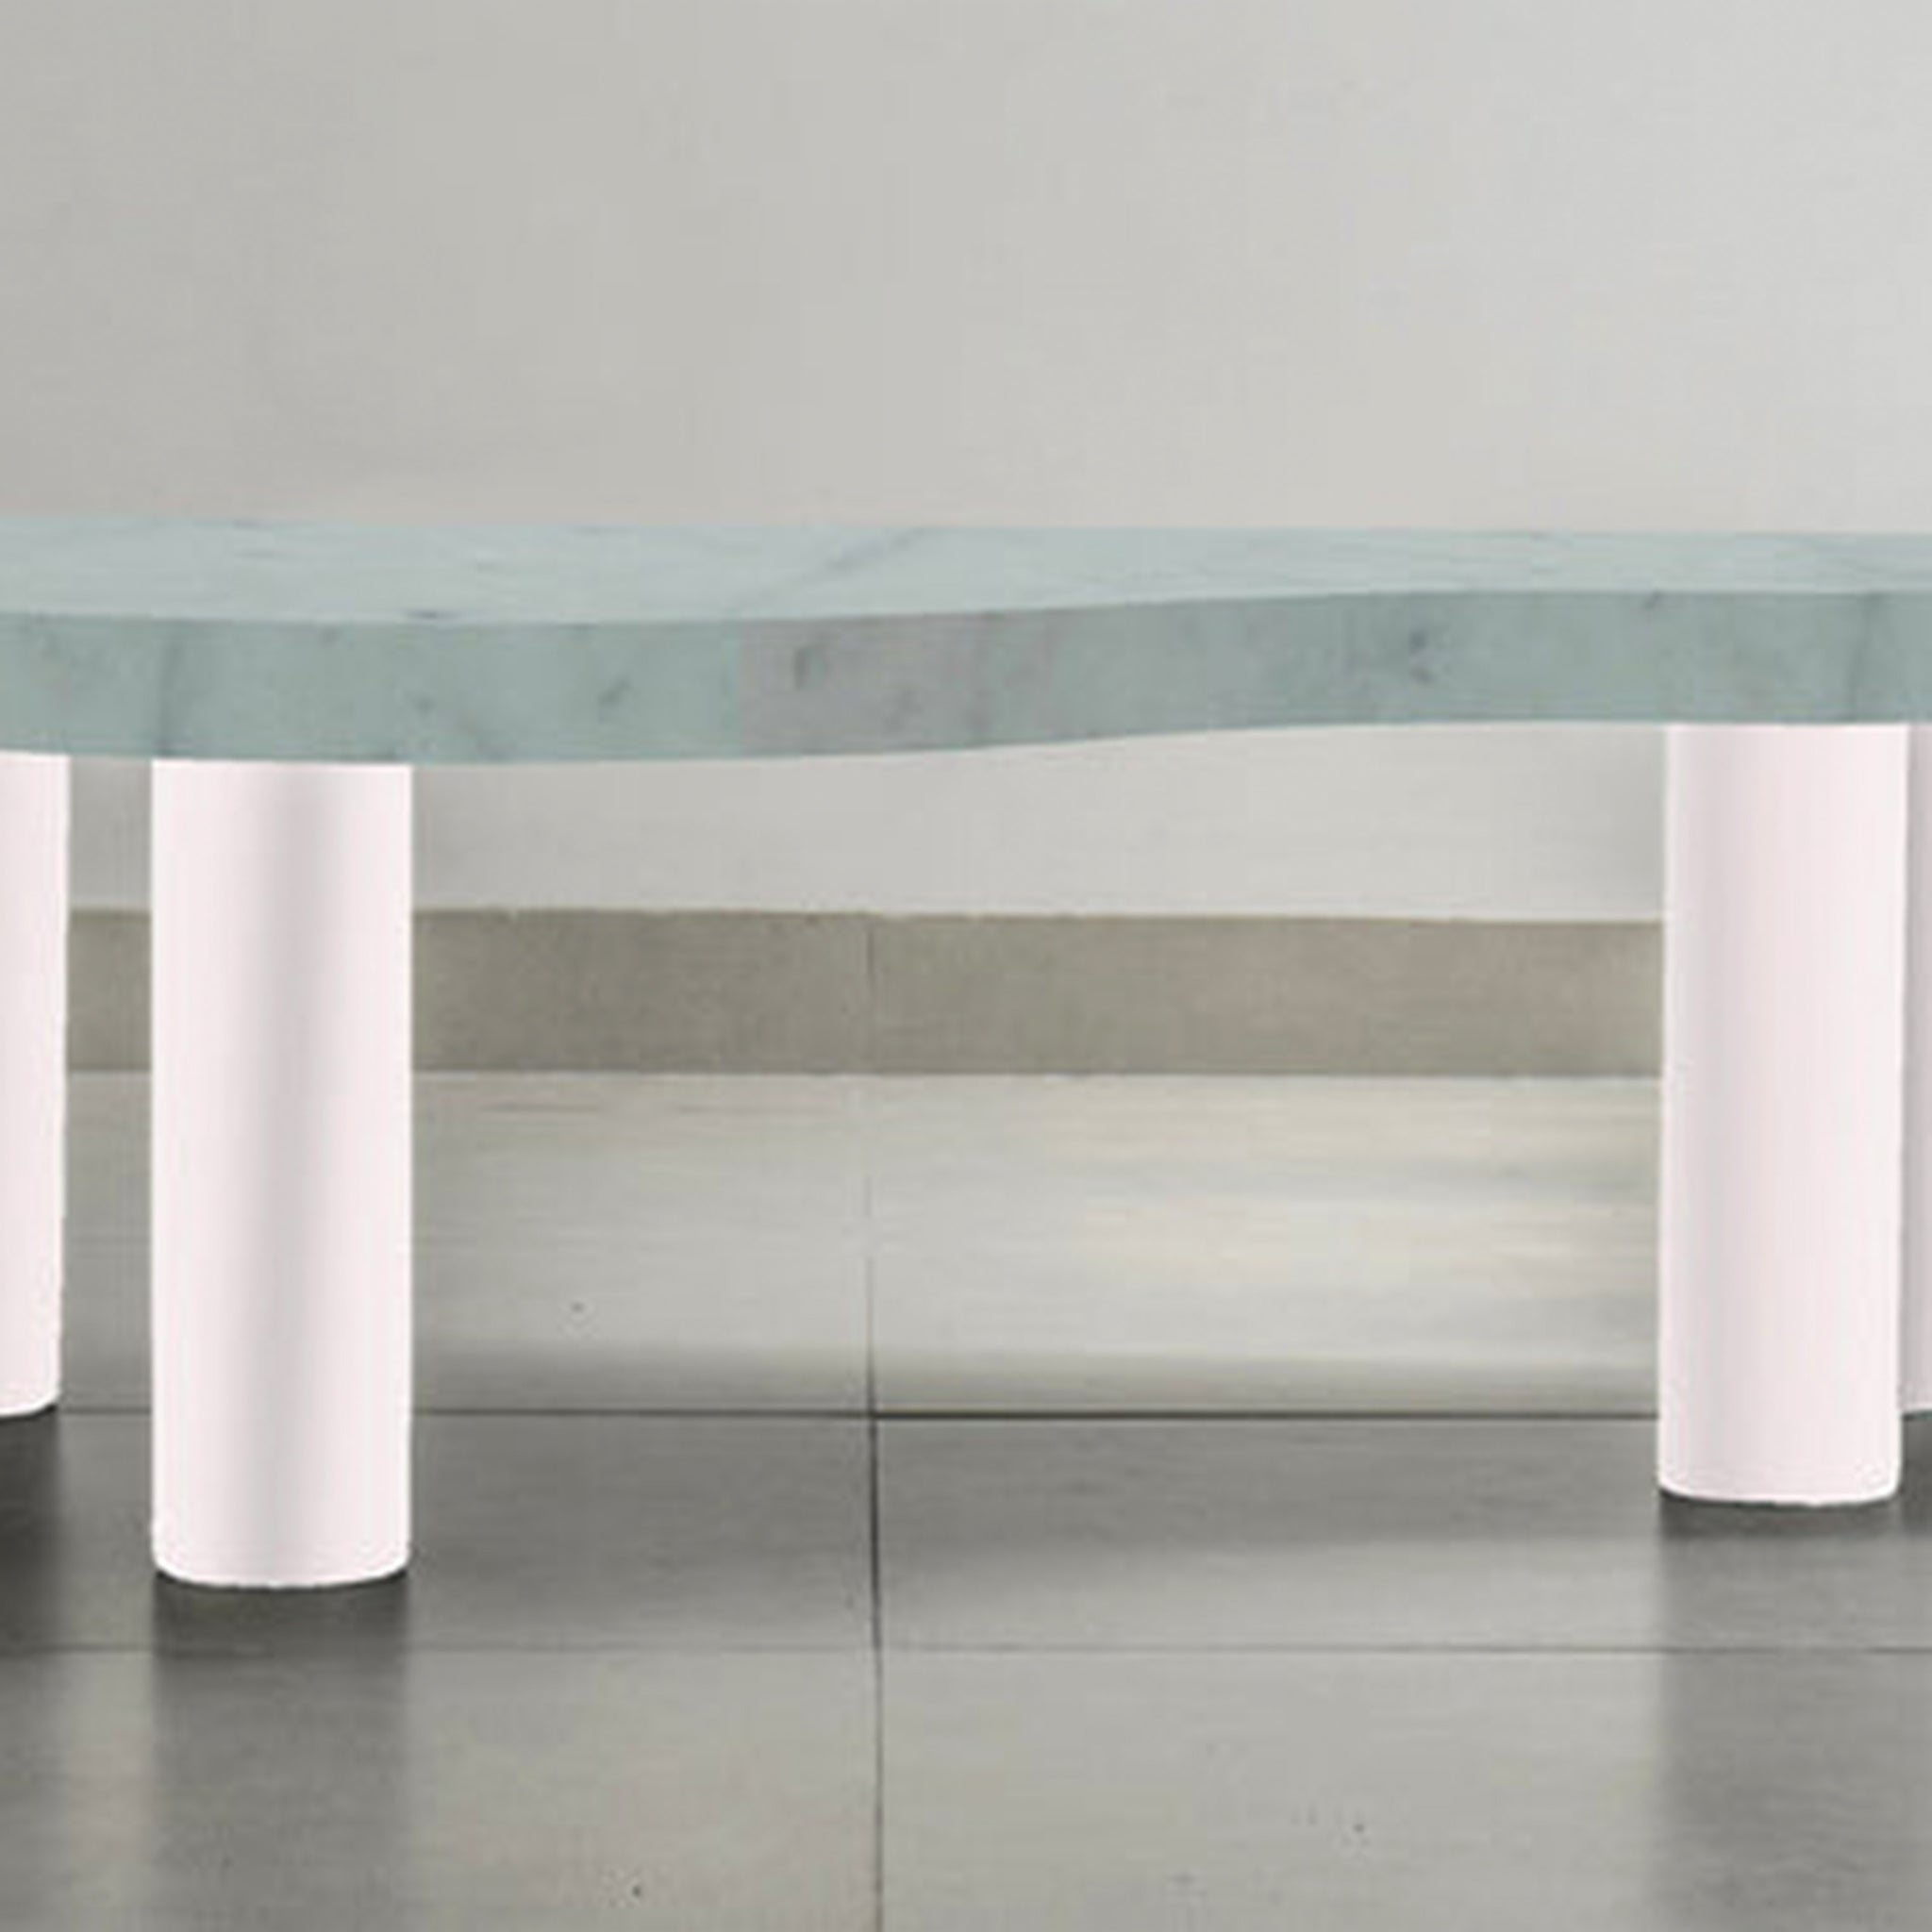 Hand-Drawn Marble Table: Unique, free-form design adds a touch of artistry. 